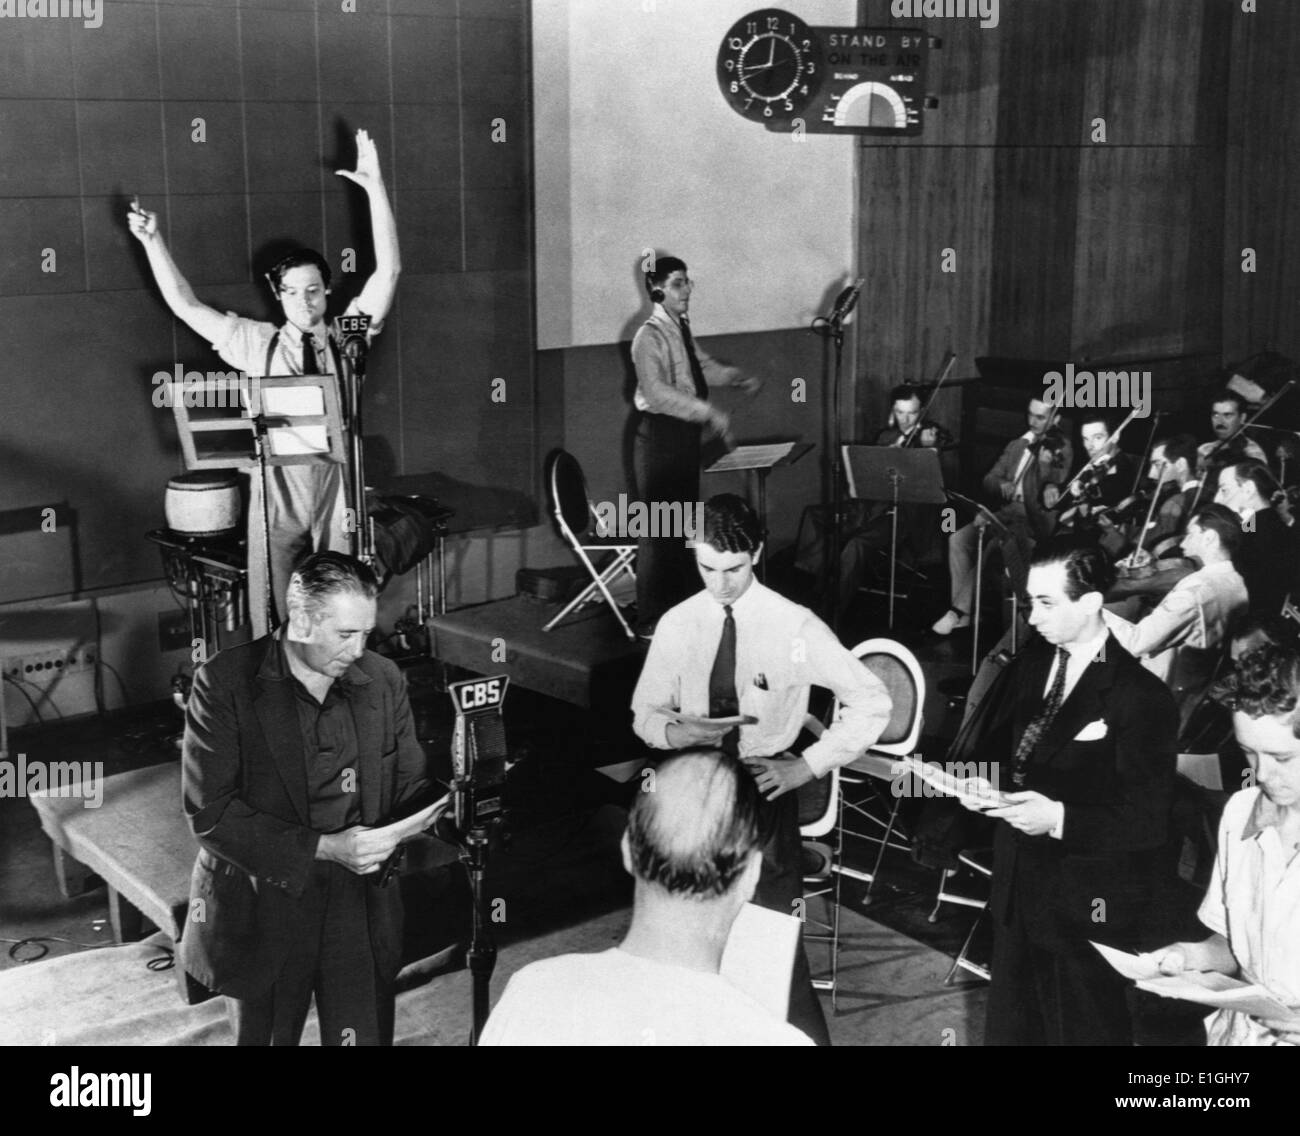 Orson Welles rehearsing a radio broadcast of H.G. Wells' classic, The War of the Worlds on October 10, 1938. The broadcast, which claimed that aliens from Mars had invaded New Jersey, terrified thousands of Americans. Stock Photo